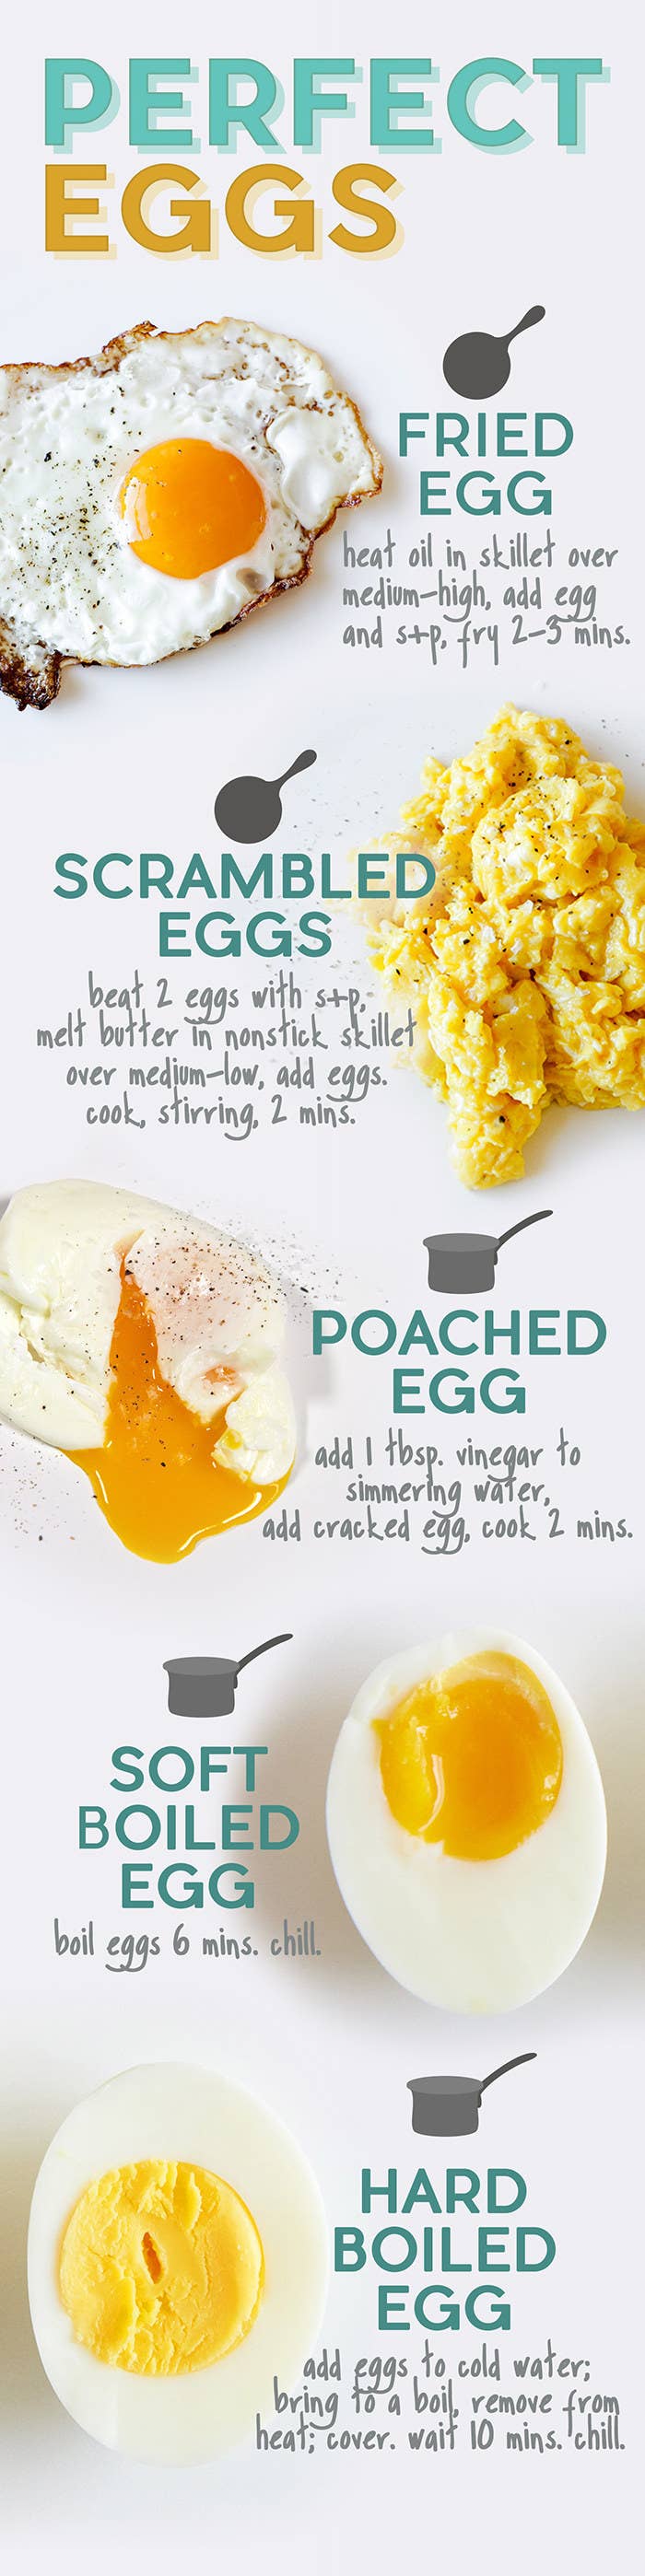 How To Never Fuck Up Your Poached Eggs